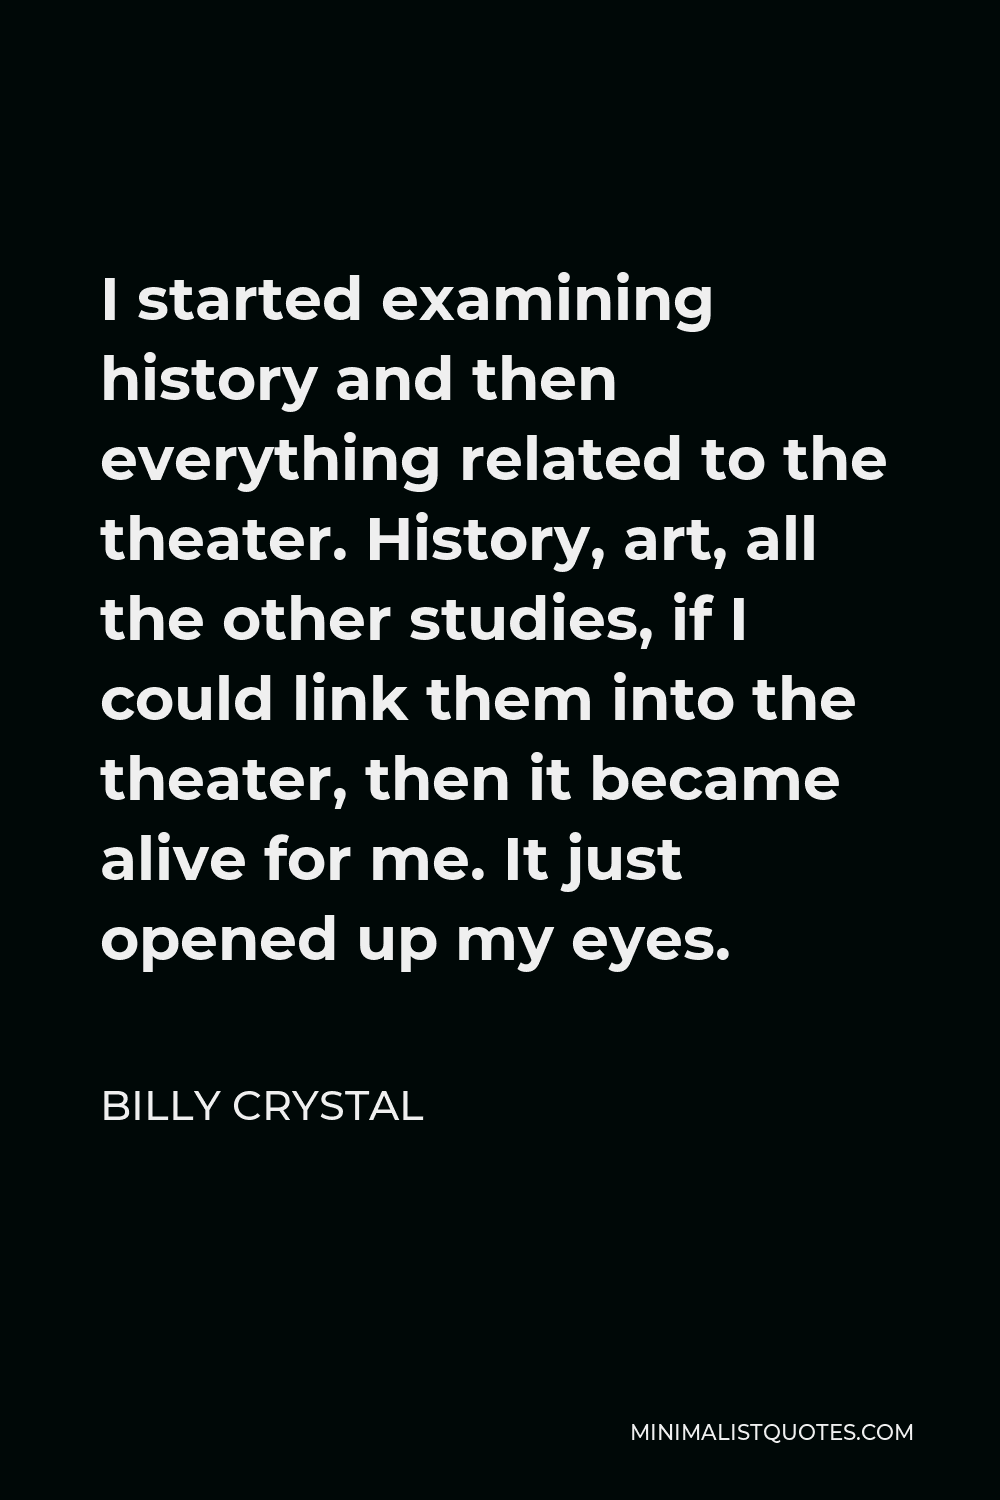 Billy Crystal Quote - I started examining history and then everything related to the theater. History, art, all the other studies, if I could link them into the theater, then it became alive for me. It just opened up my eyes.